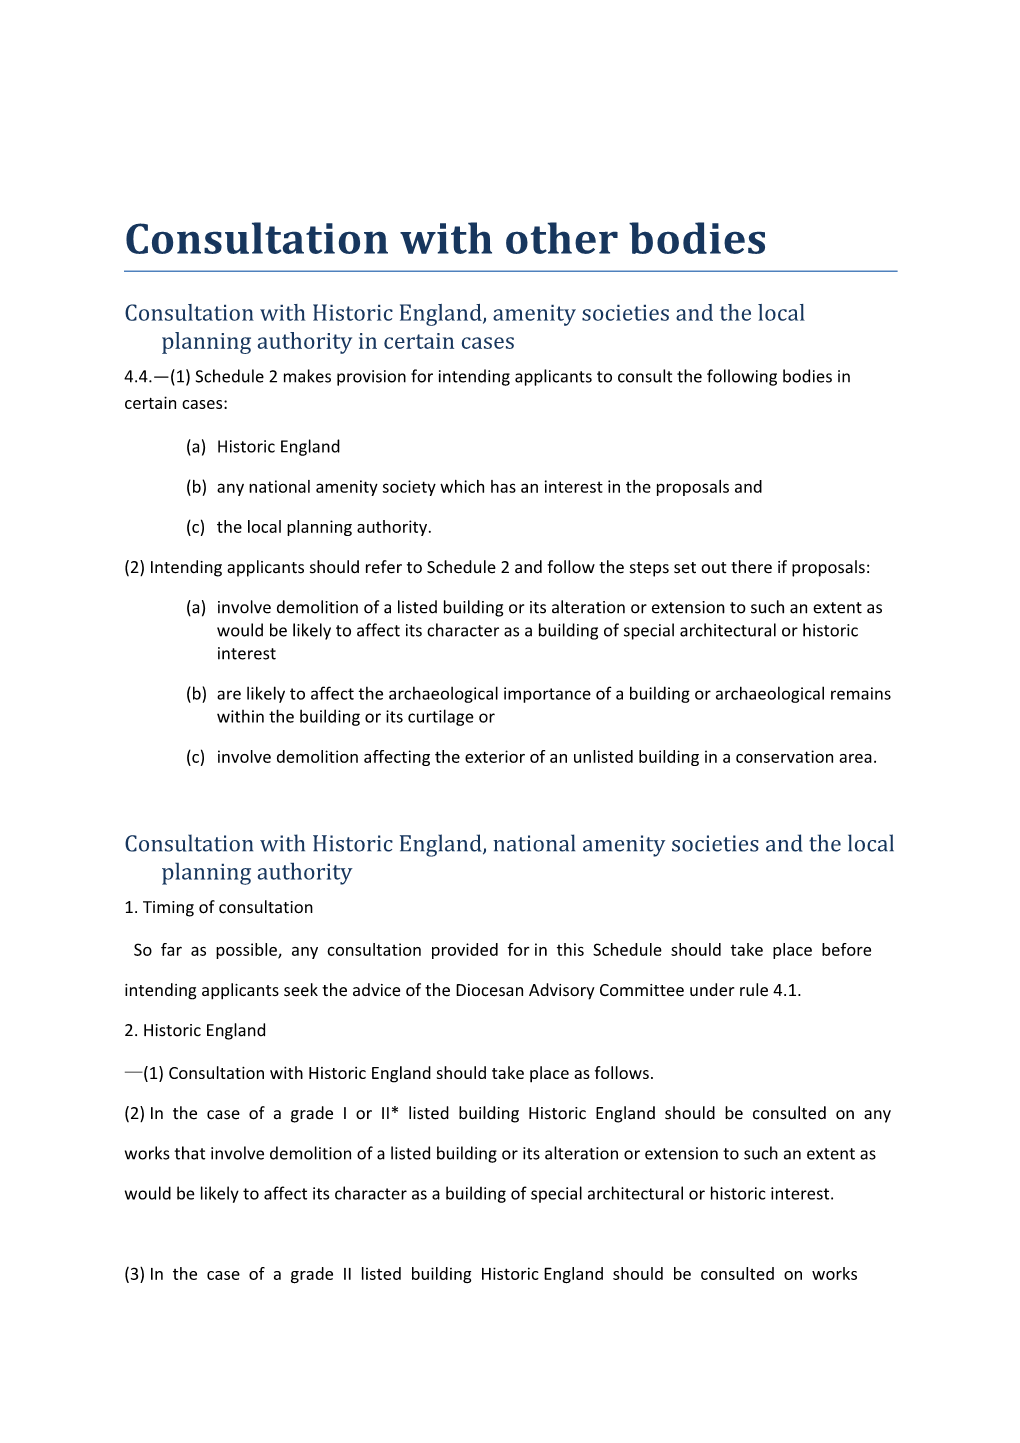 Consultation with Other Bodies